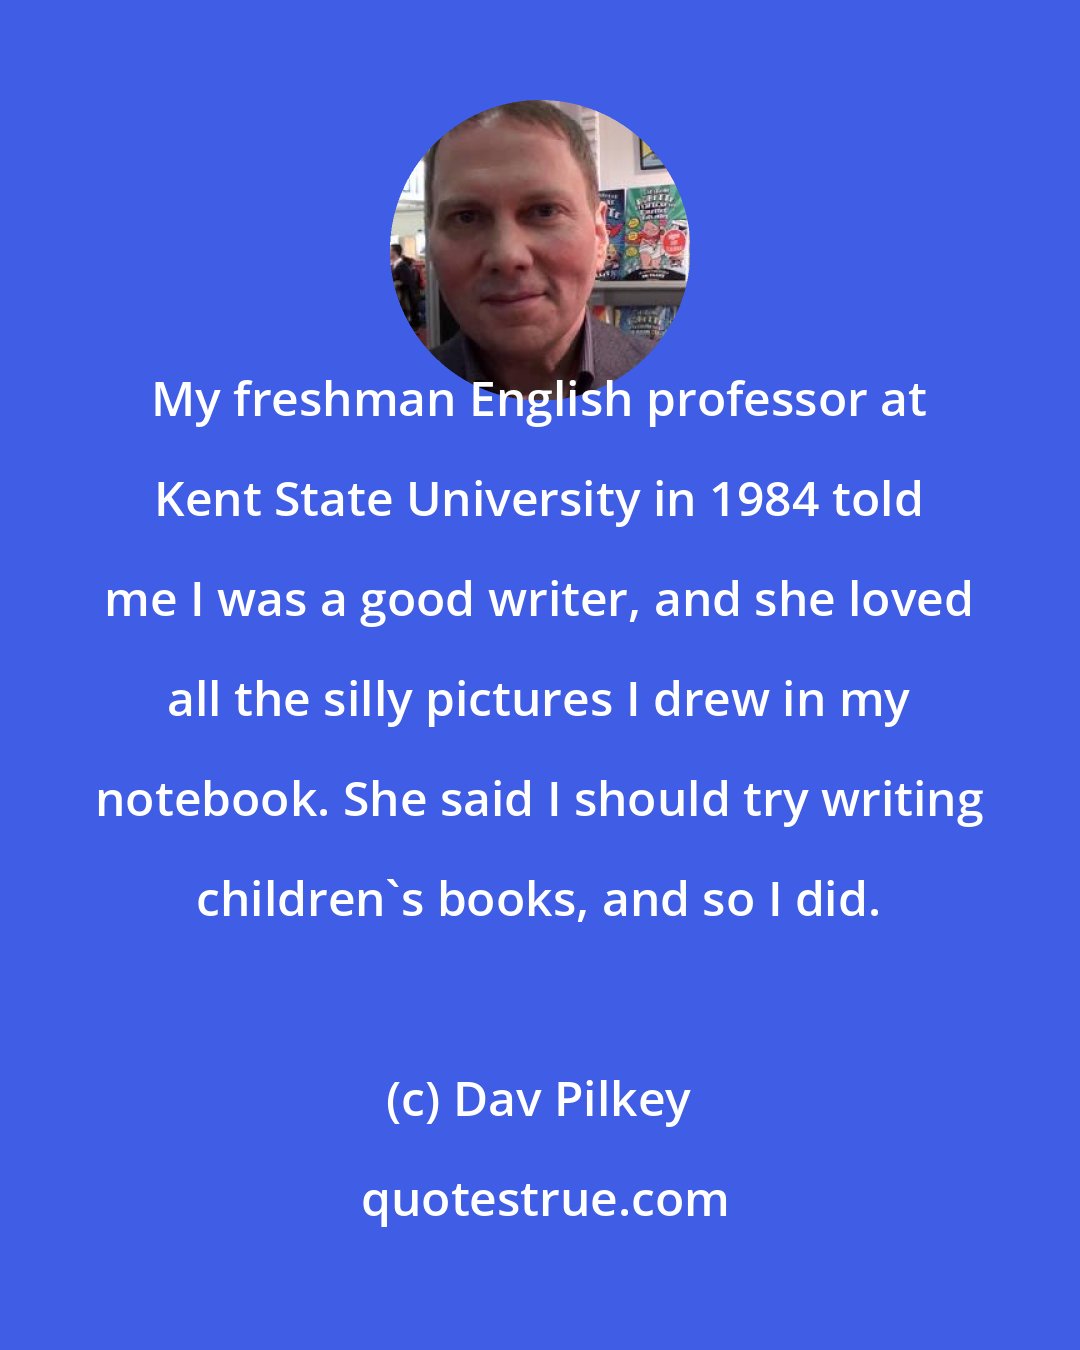 Dav Pilkey: My freshman English professor at Kent State University in 1984 told me I was a good writer, and she loved all the silly pictures I drew in my notebook. She said I should try writing children's books, and so I did.